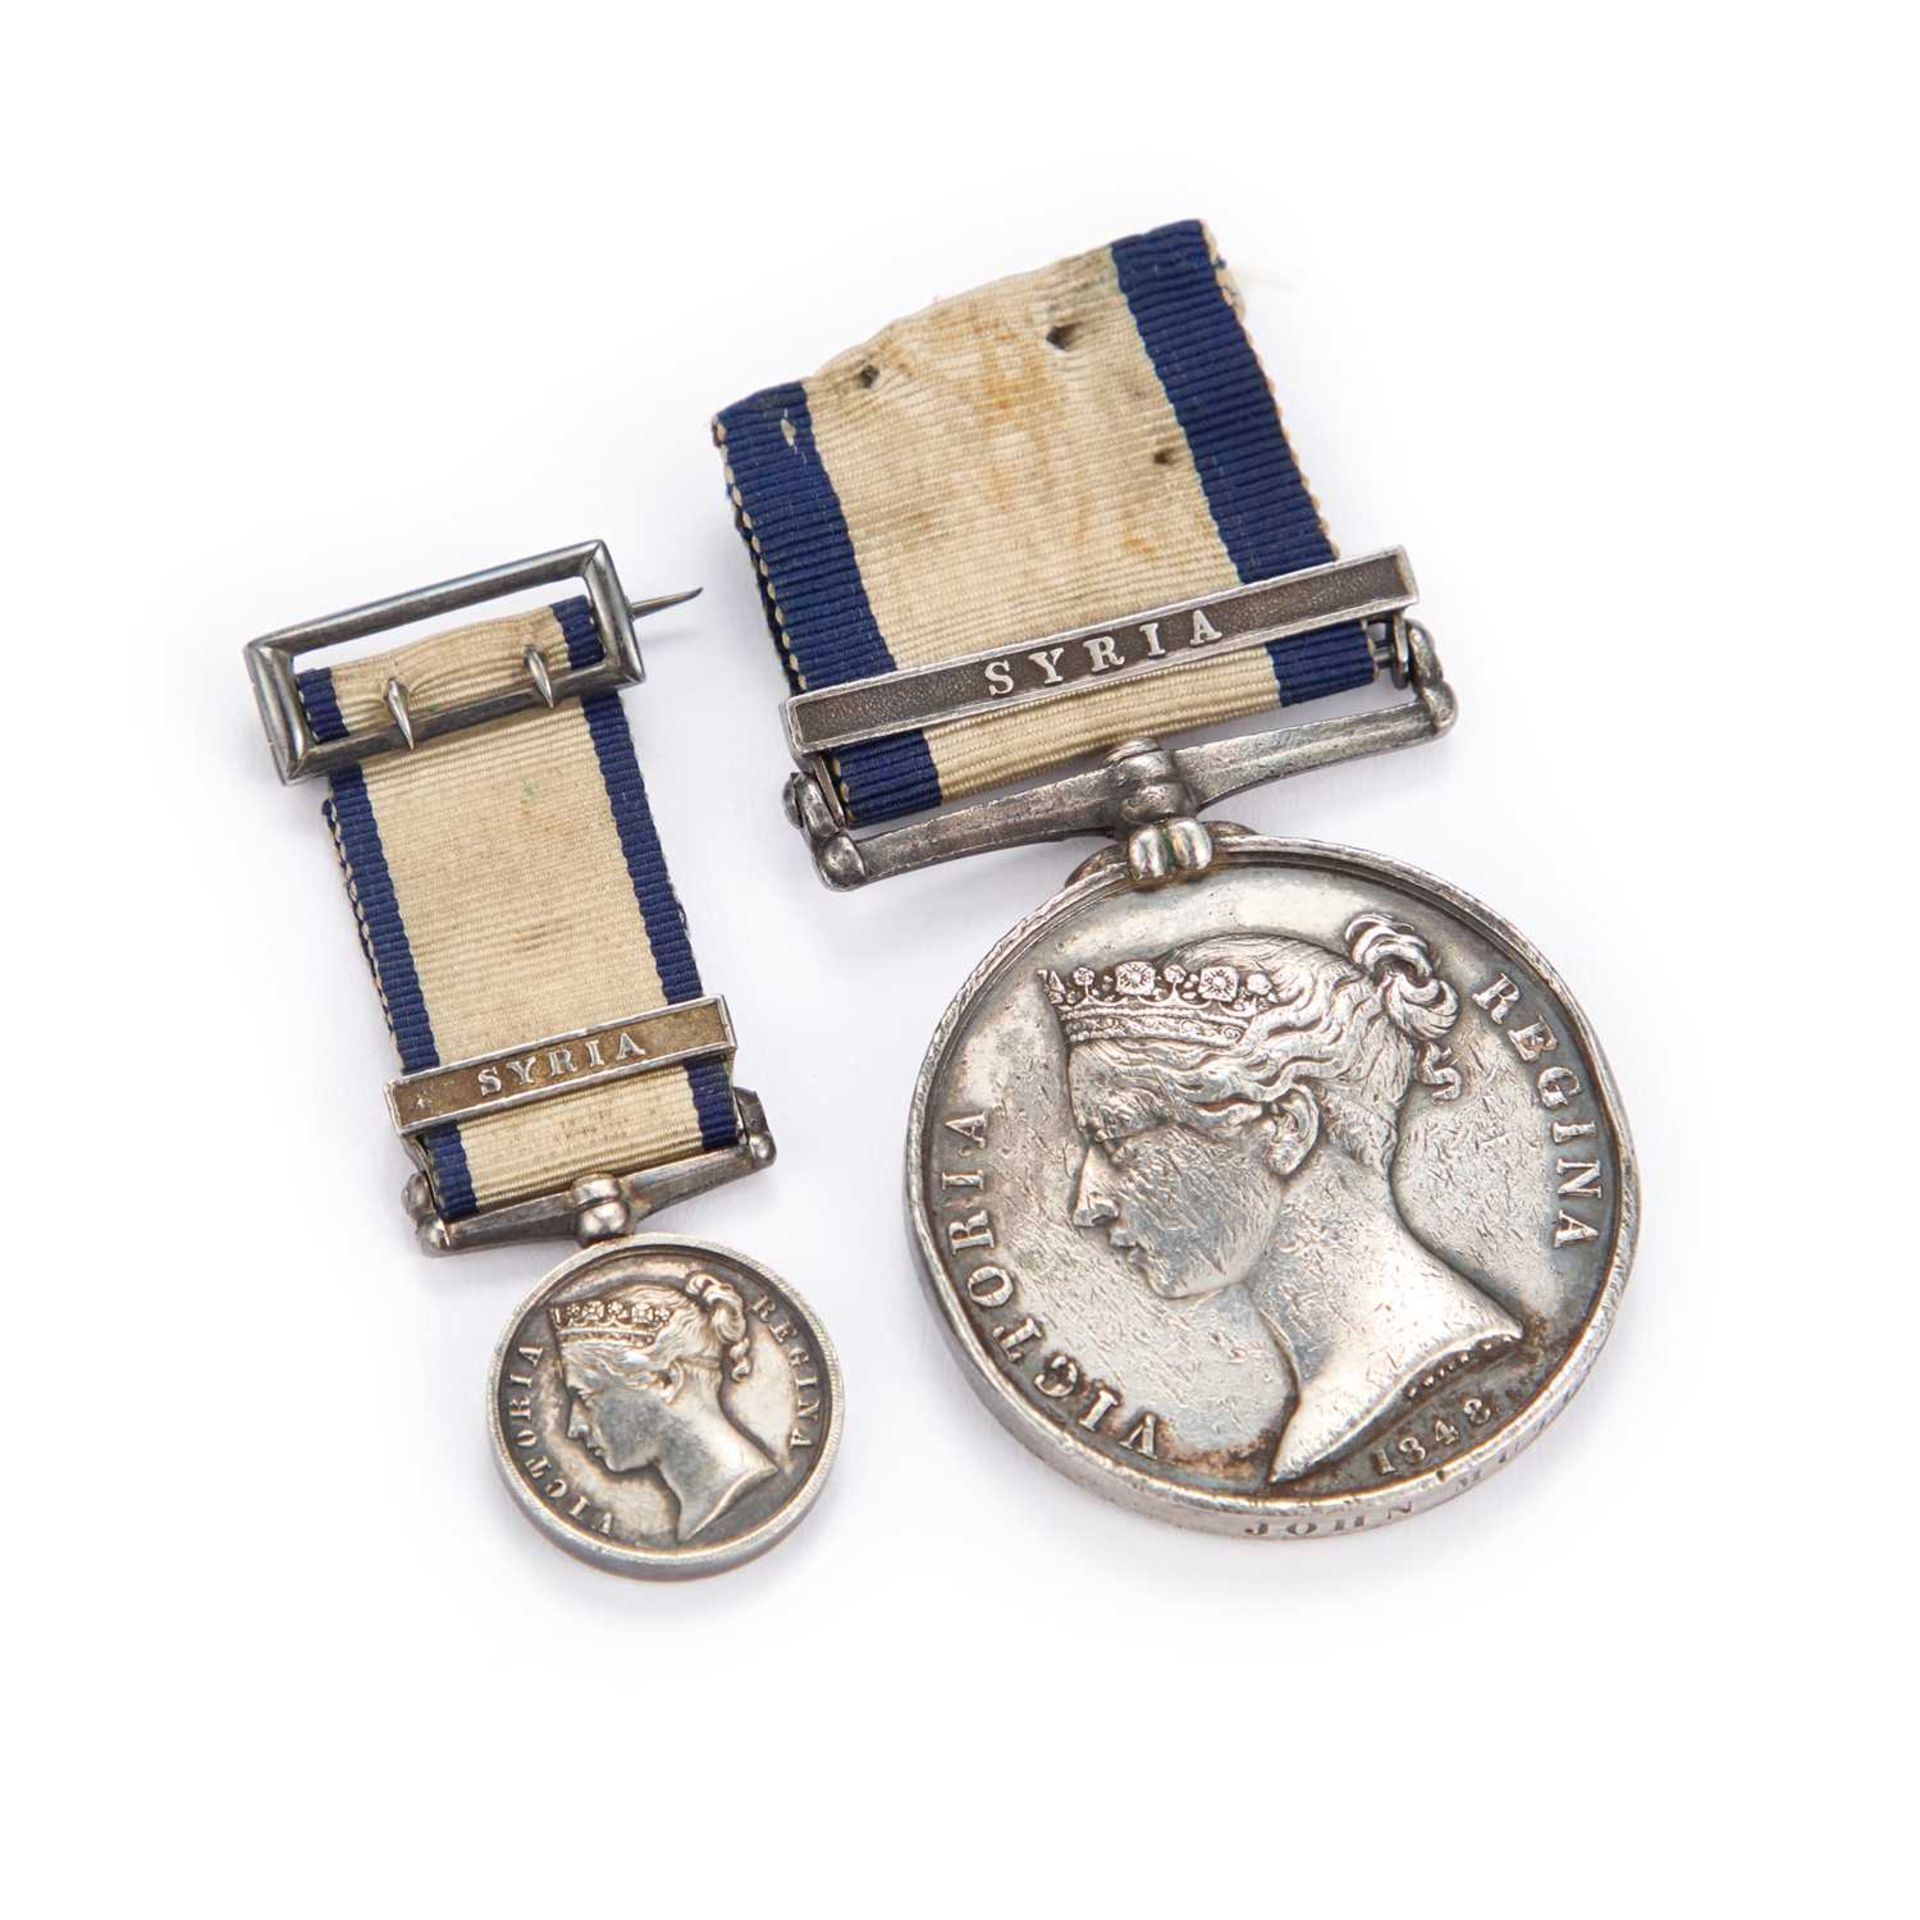 A NAVAL GENERAL SERVICE MEDAL 1793-1840, WITH MINIATURE MEDAL